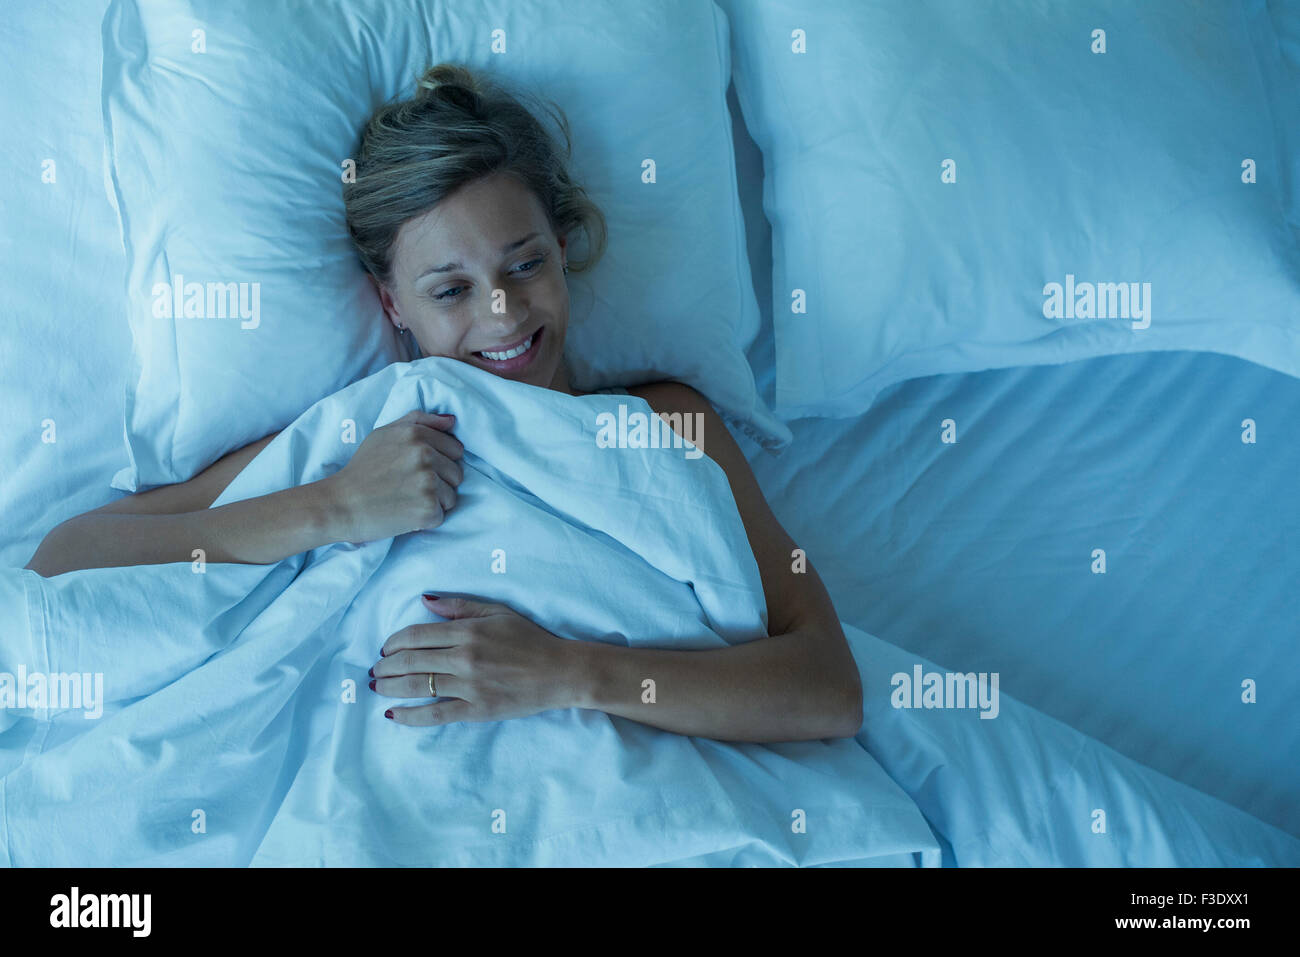 Woman lying in bed, smiling Stock Photo